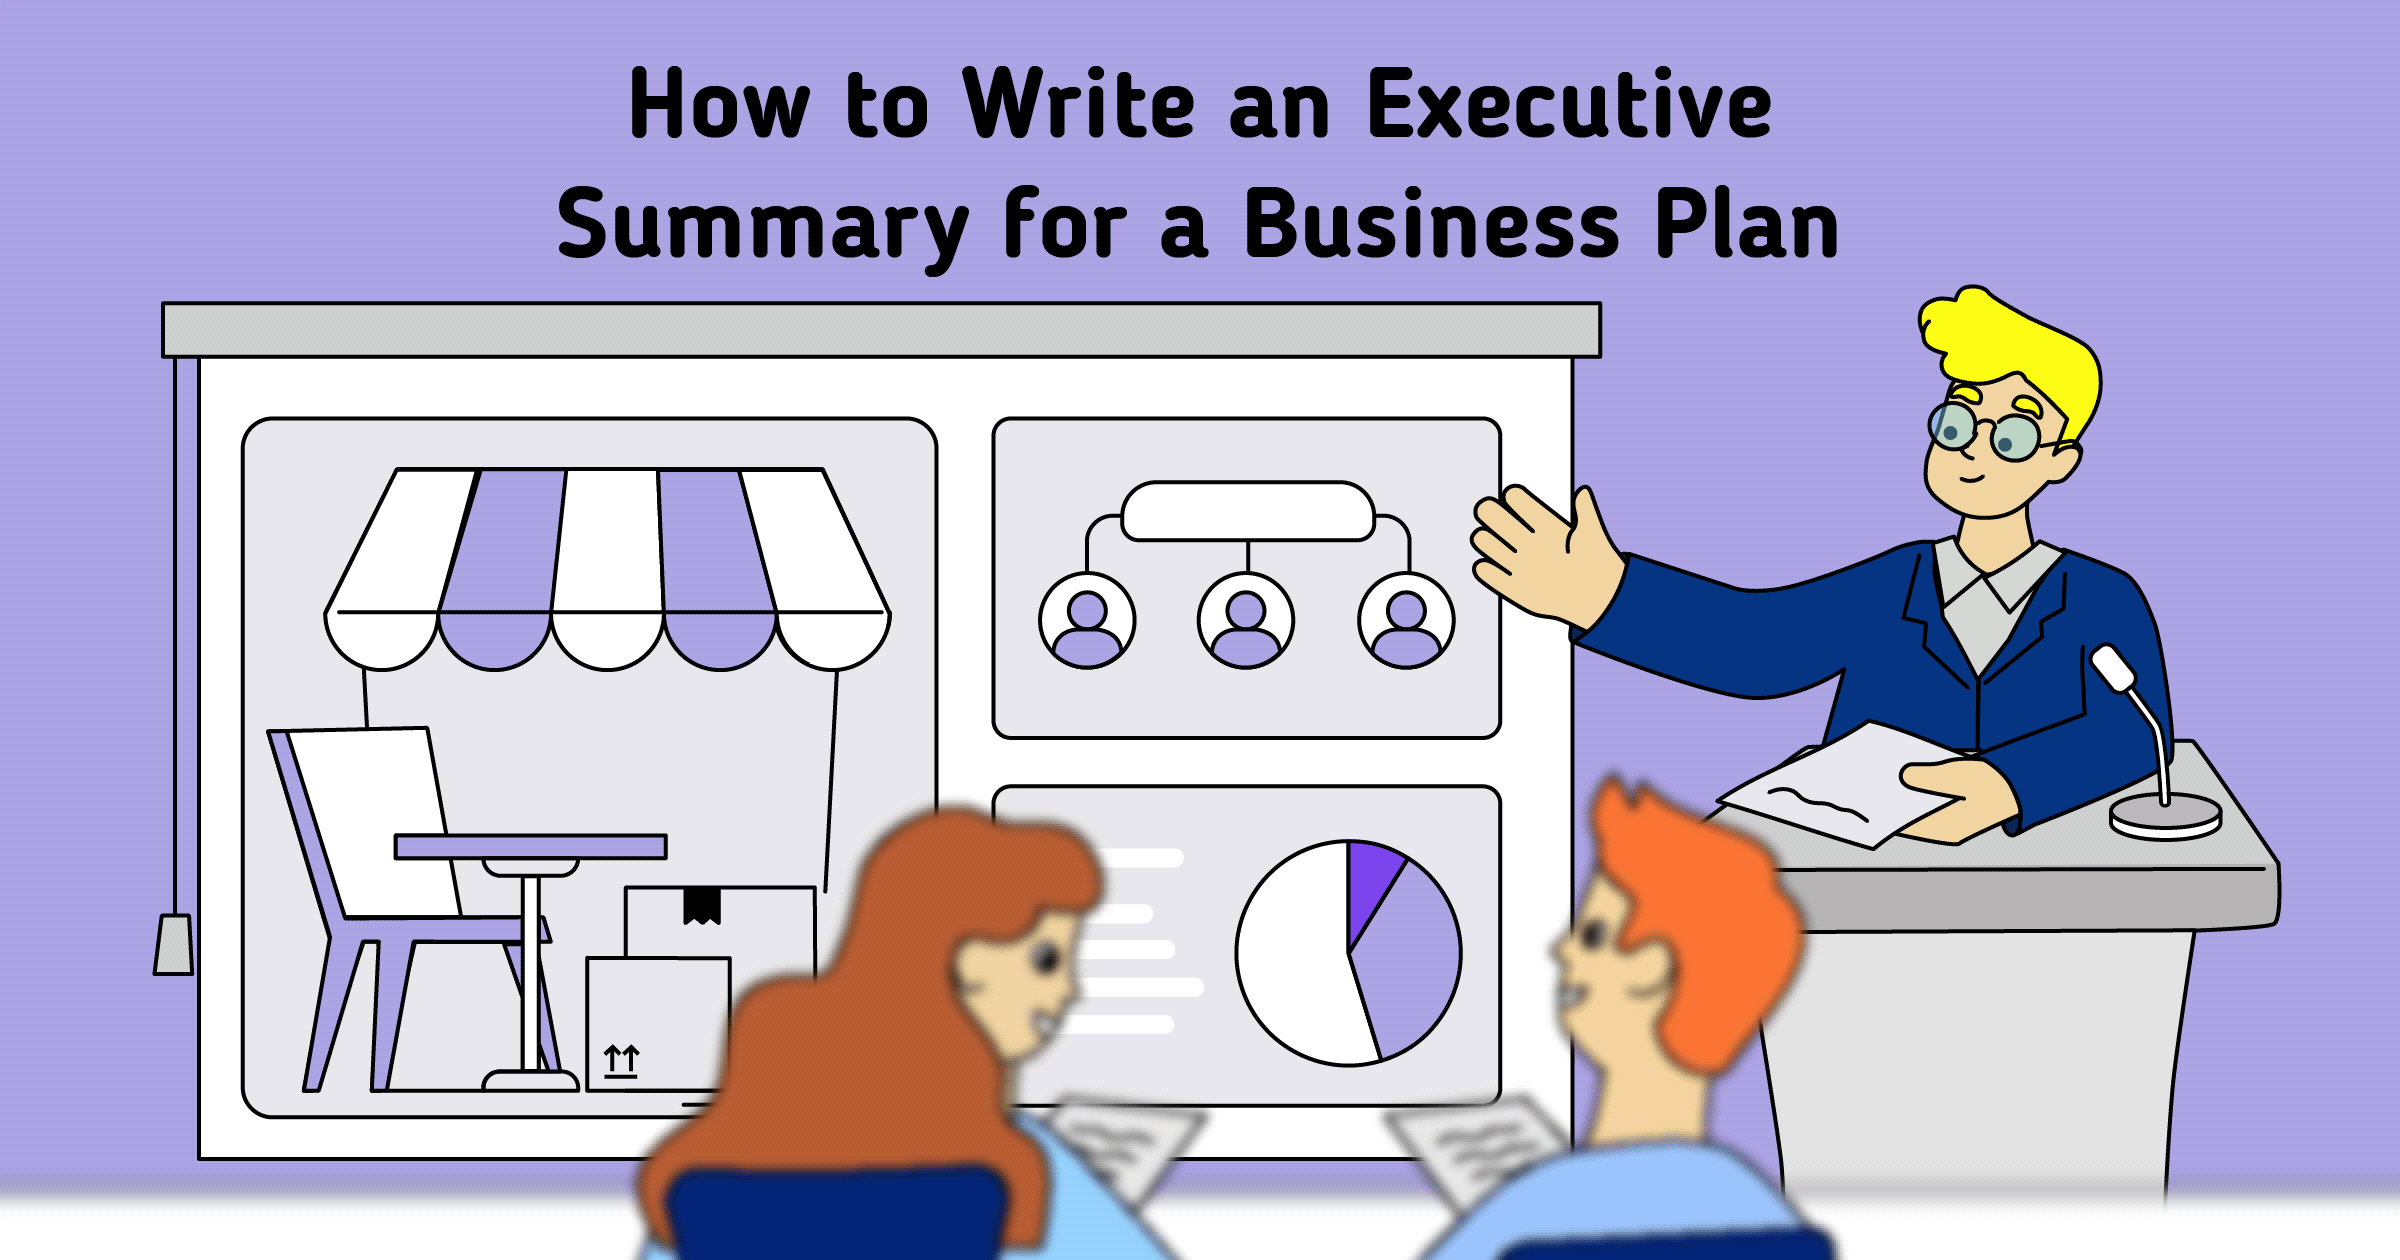 what is the executive summary component of a business plan multiple choice question